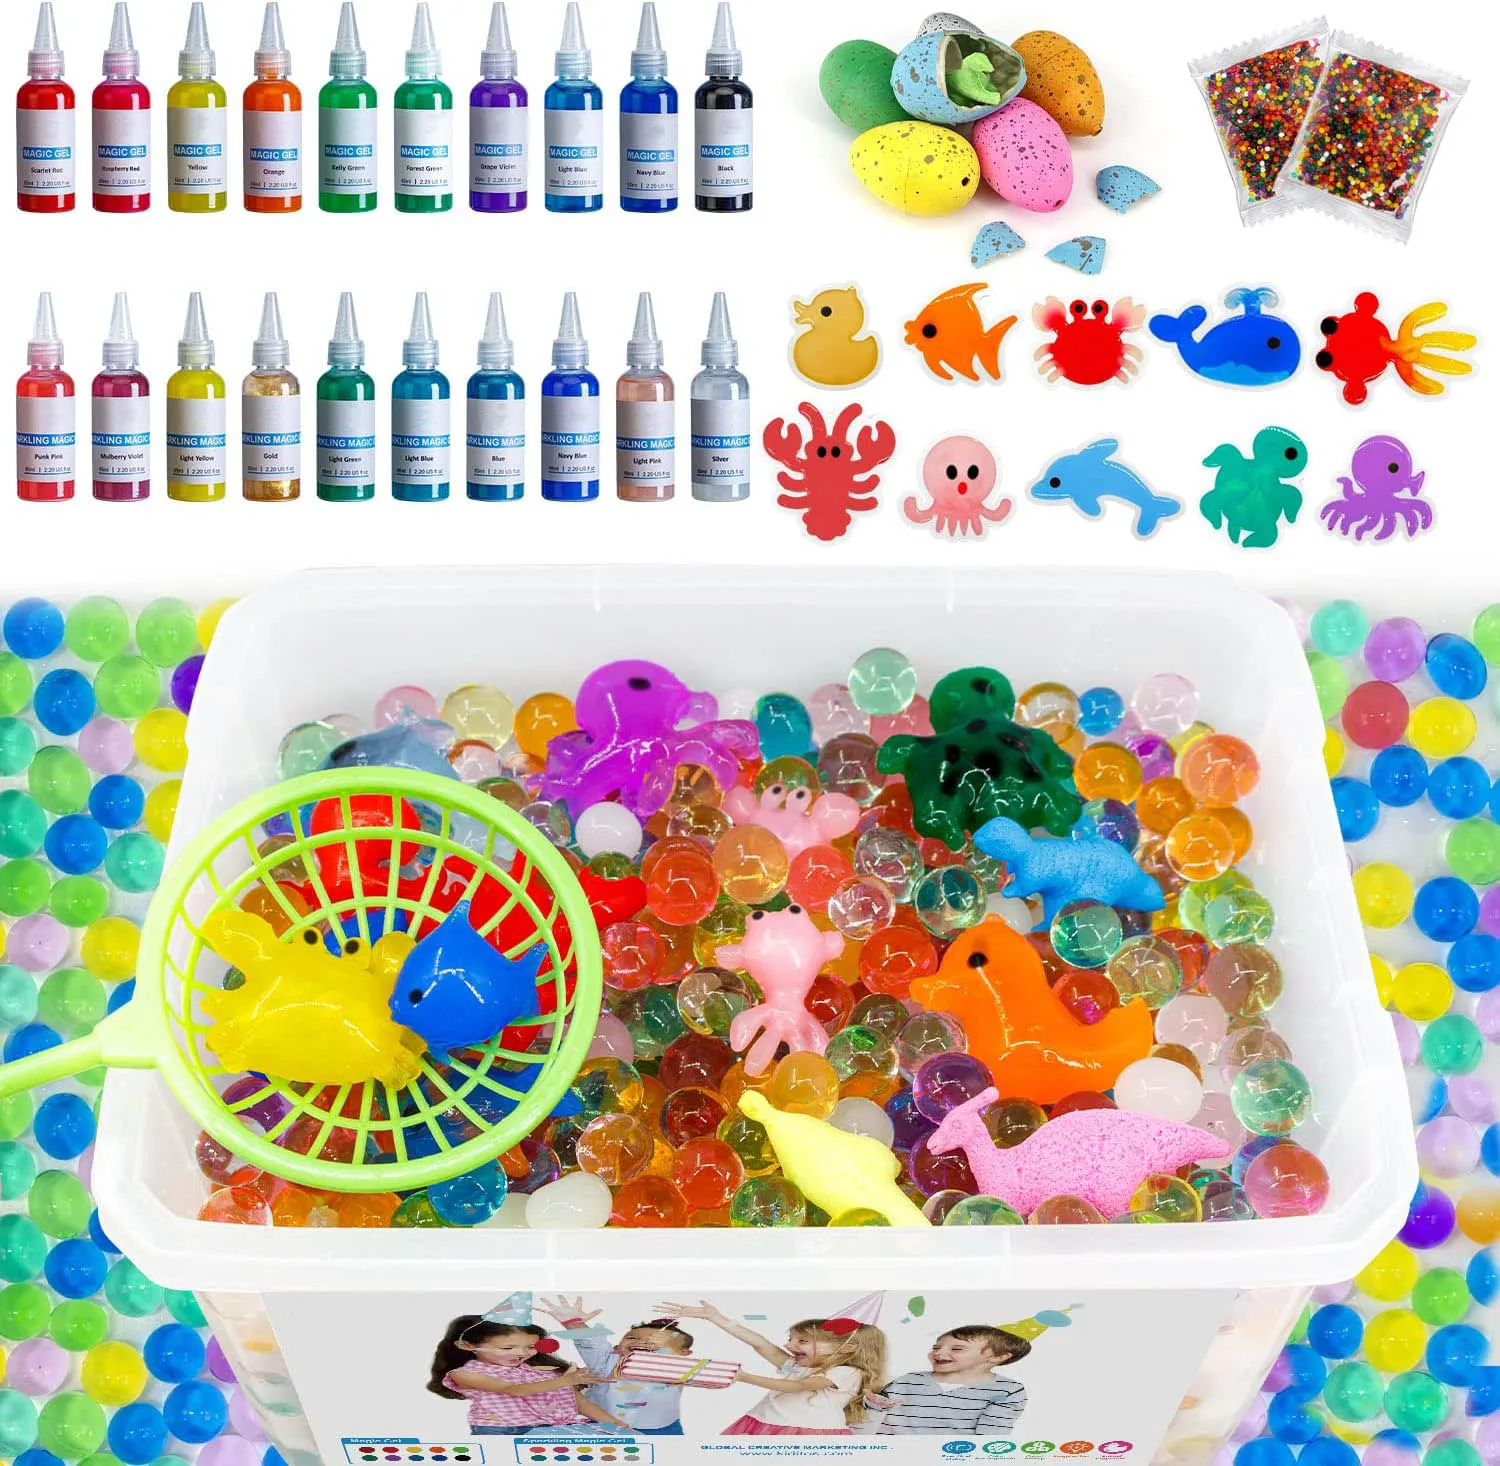 Magic Paint Toy Aqua Fairy Toy Set For Kids Kids Craft Kit For Sea Creature  Water Elf Kit Fun And Early Education Toys For